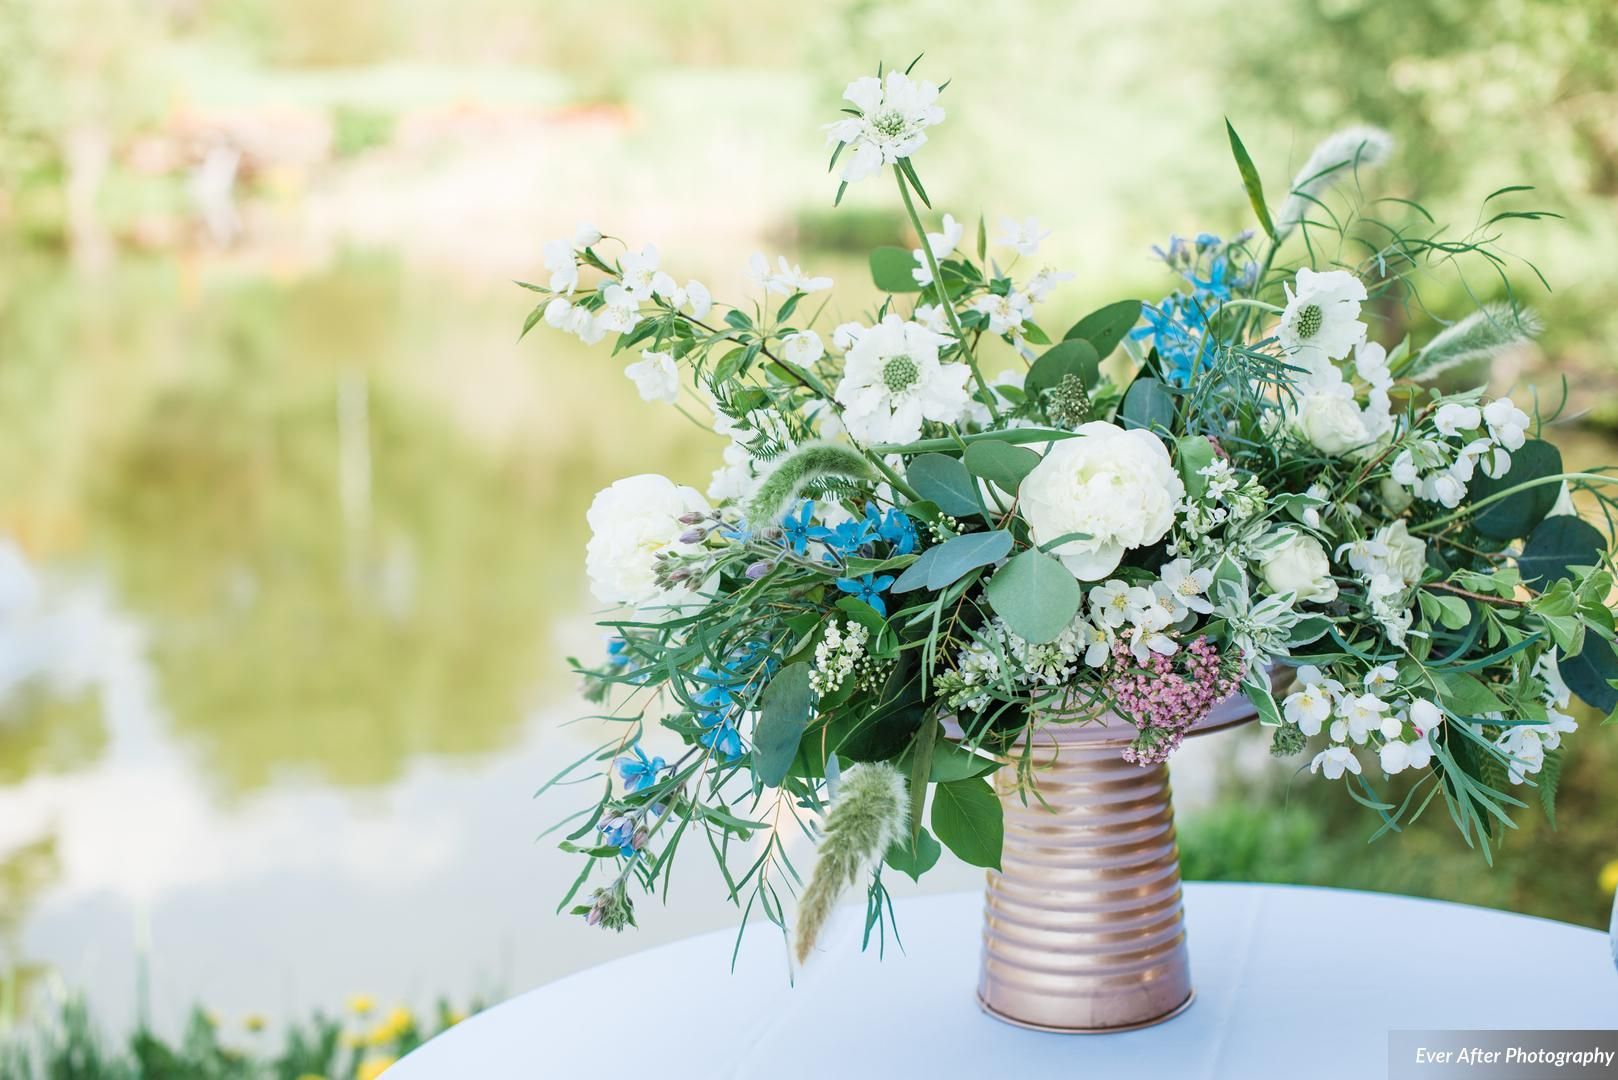 Hand made wedding bouquet with copper vase, peonies, and blue flowers.